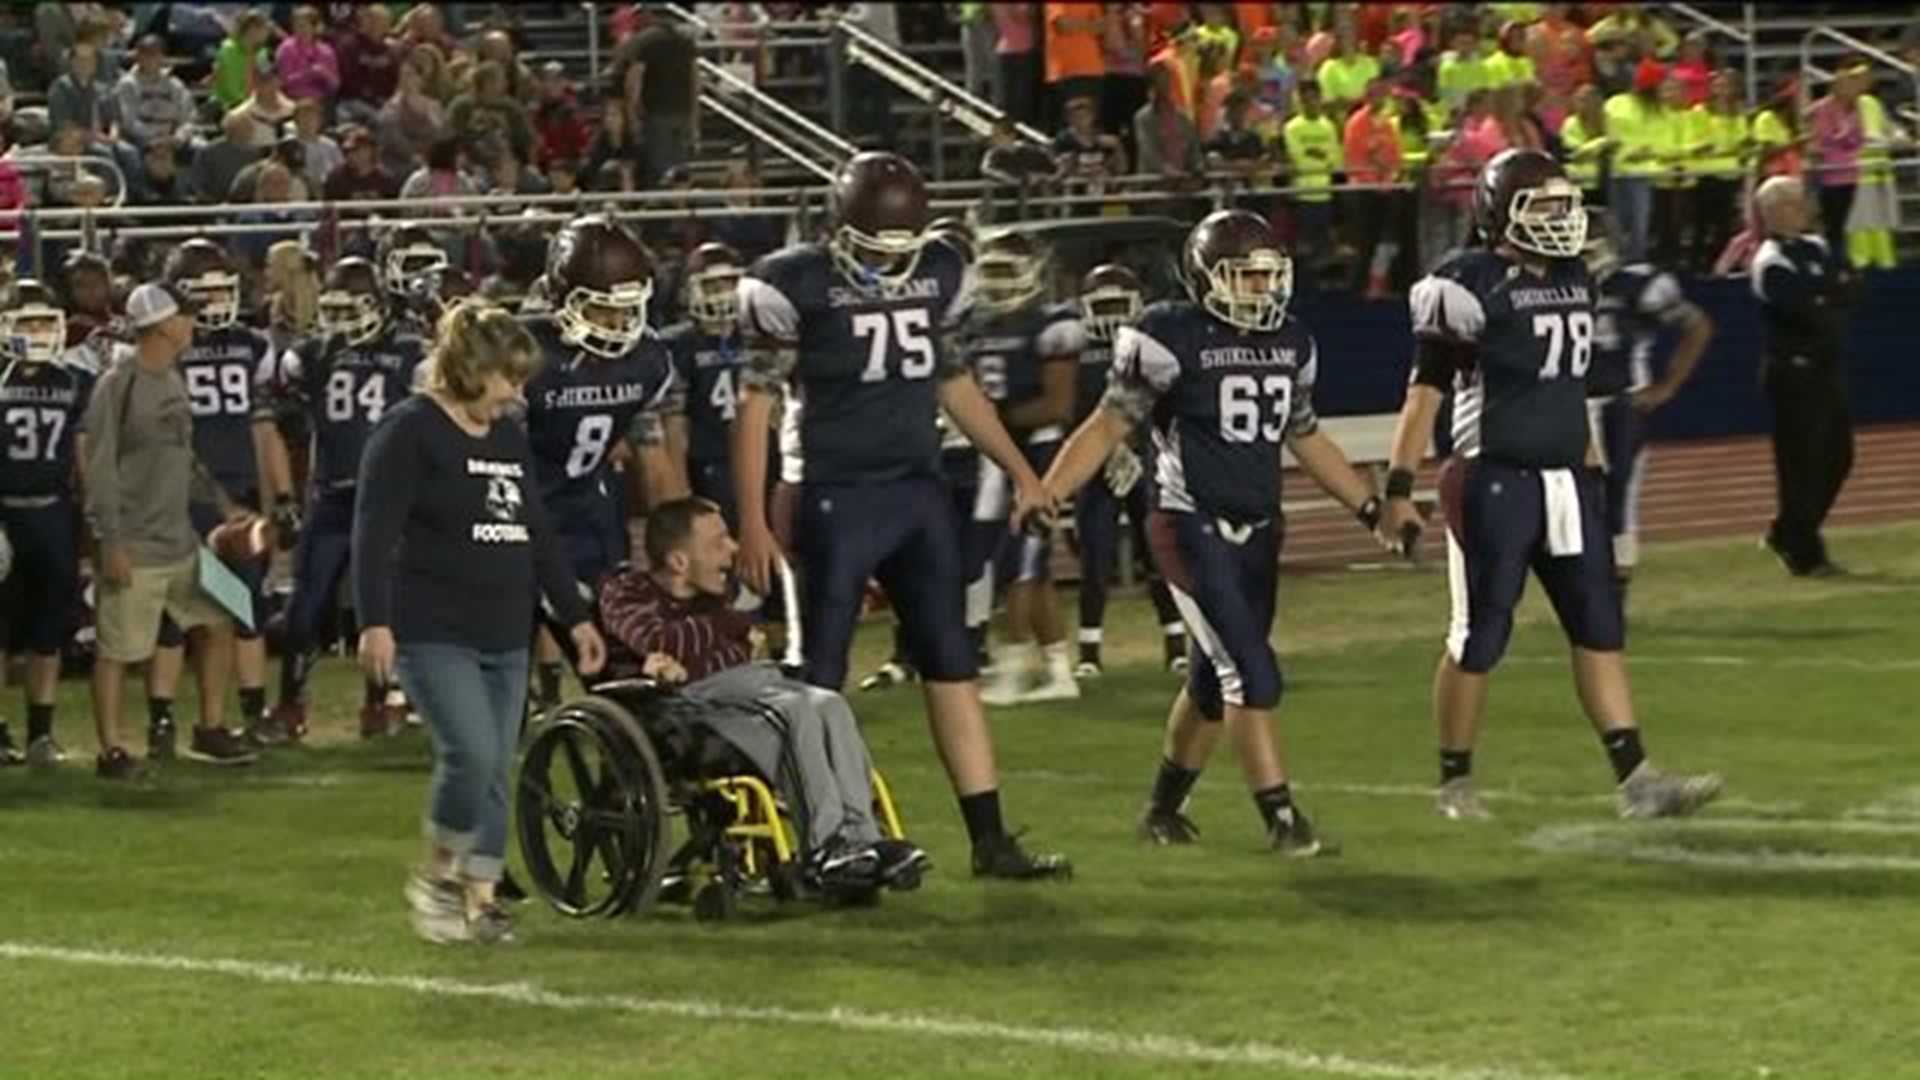 A Special Football Team Co-Captain For Shikellamy